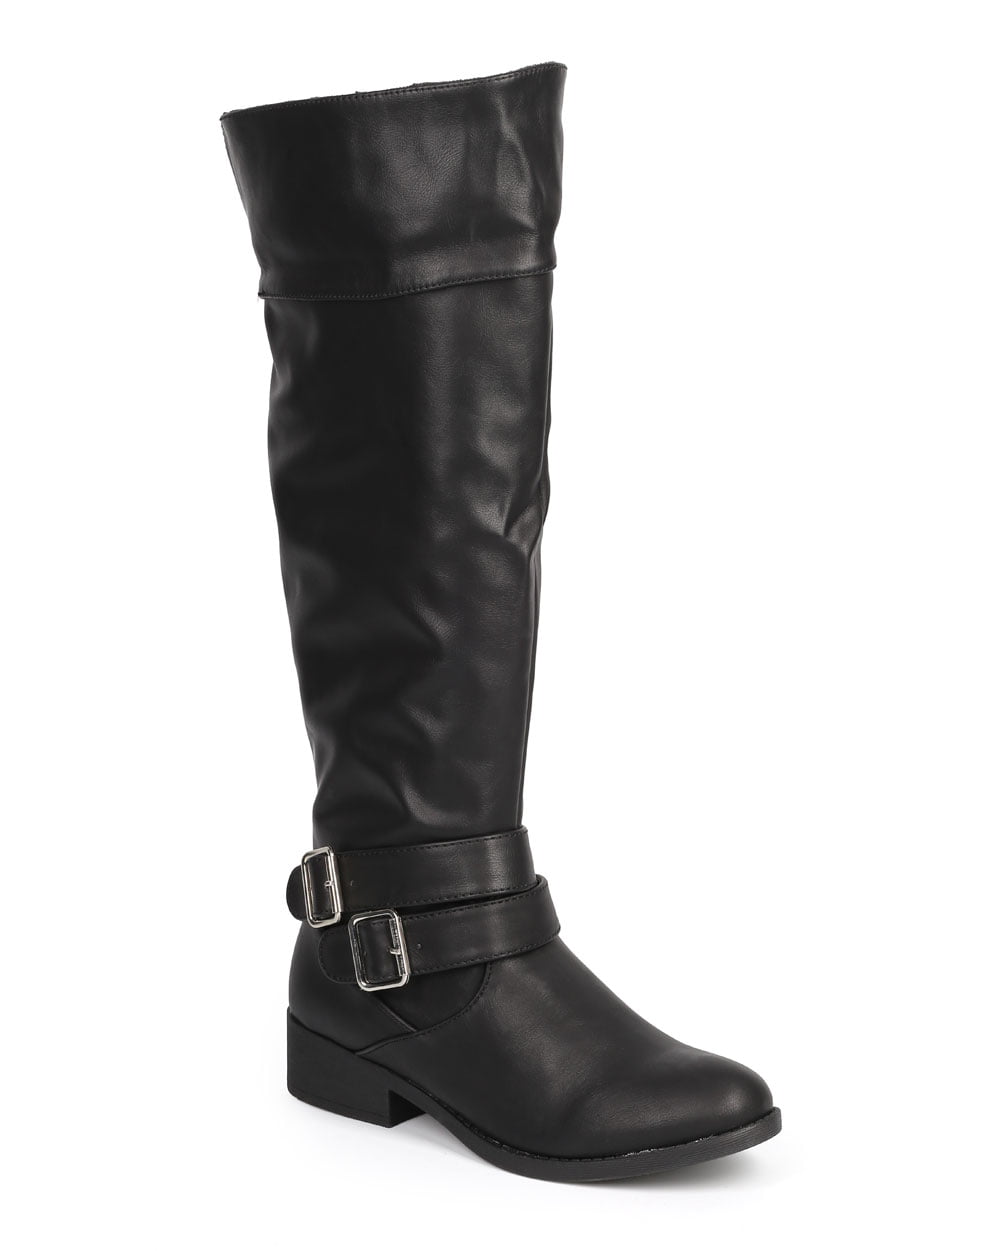 Qupid DC06 Women Leatherette Knee High Shearling Foldover Motorcycle ...